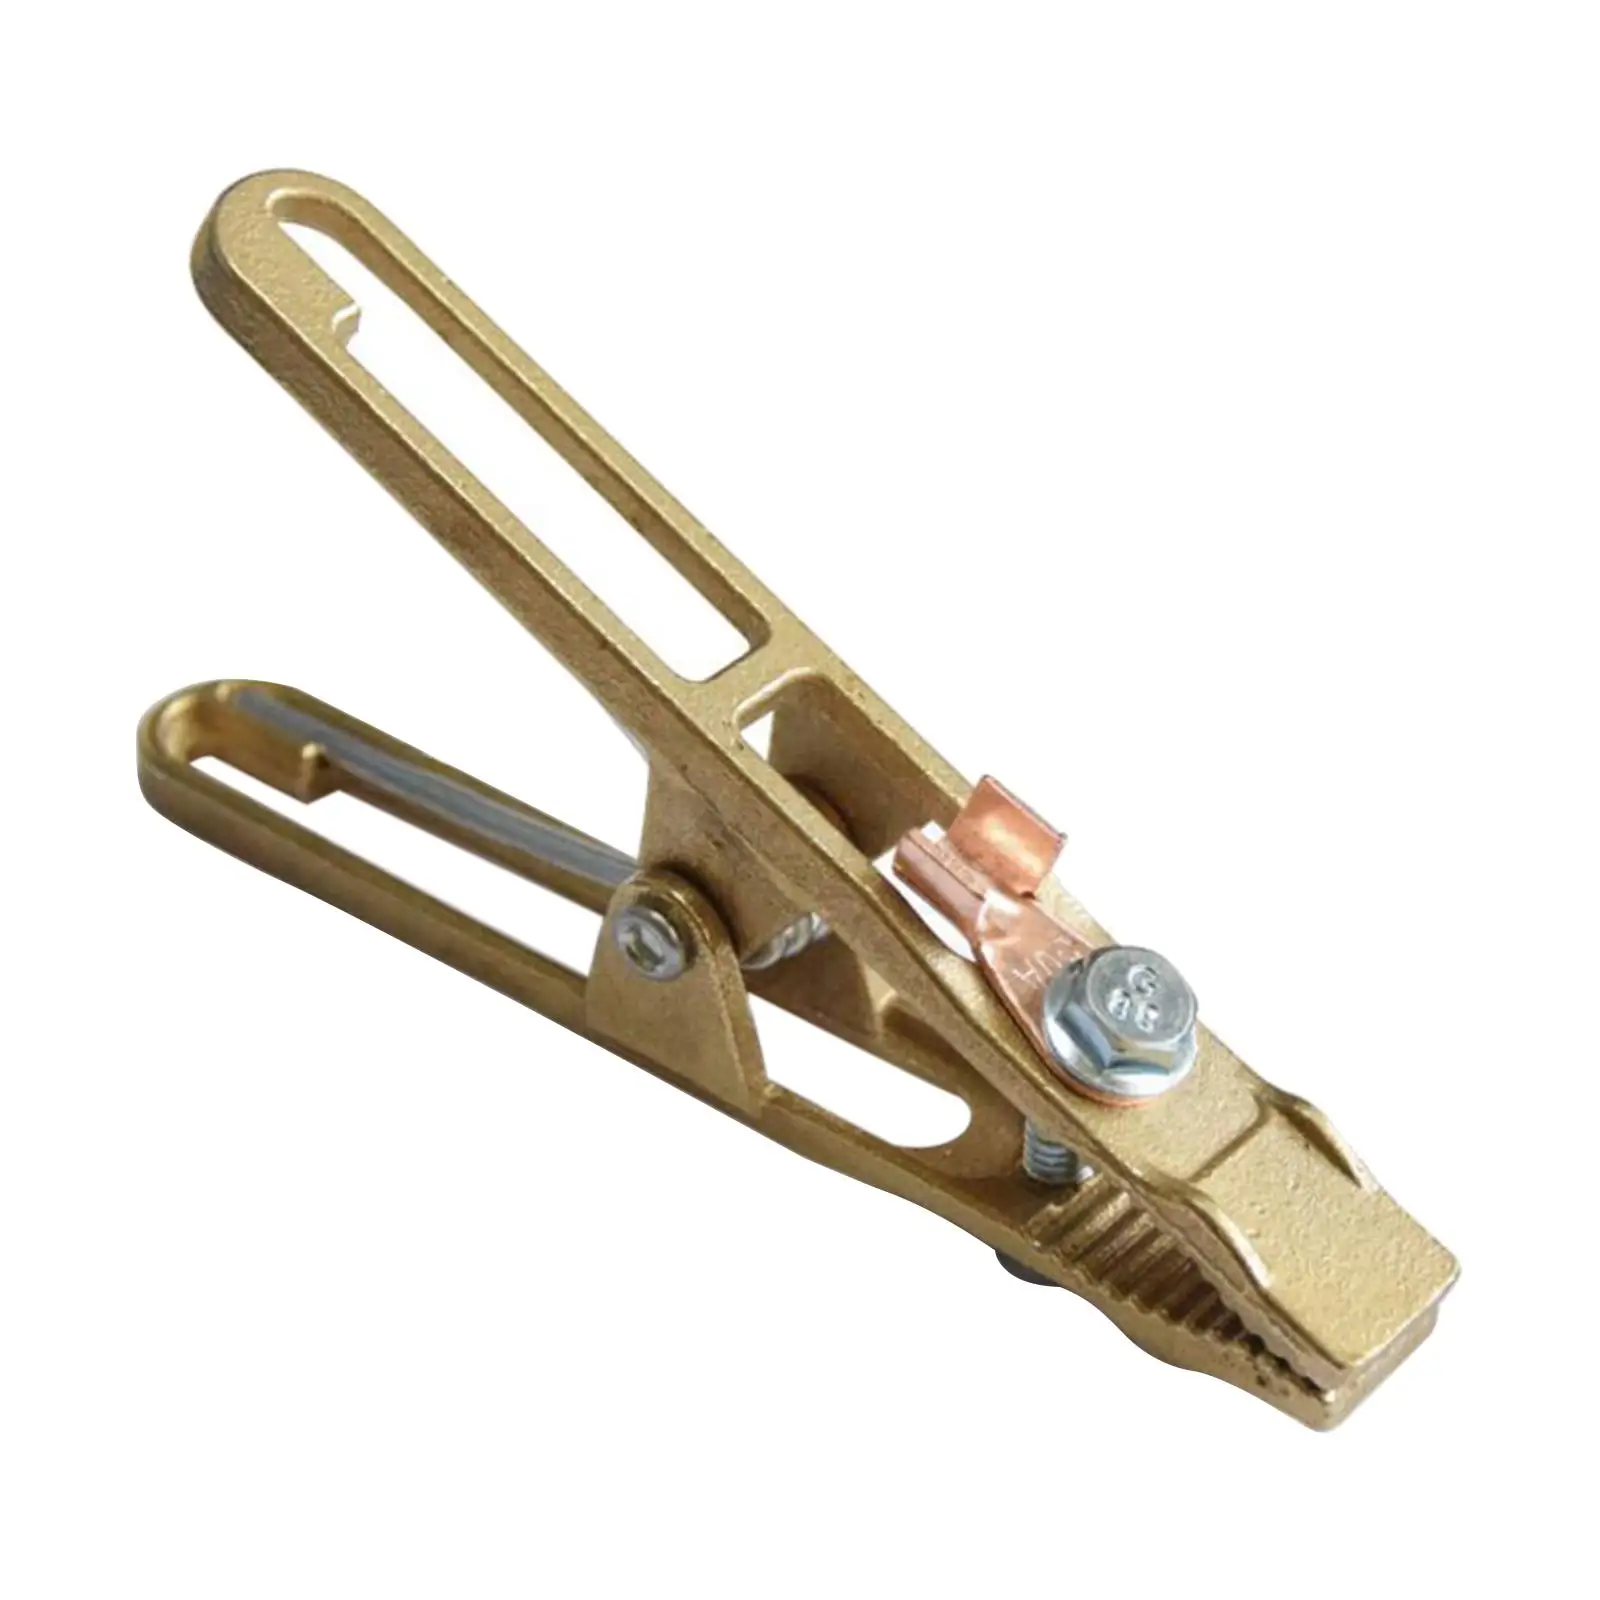 Ground Welding Clamp Easy to Assemble Stable Performance for